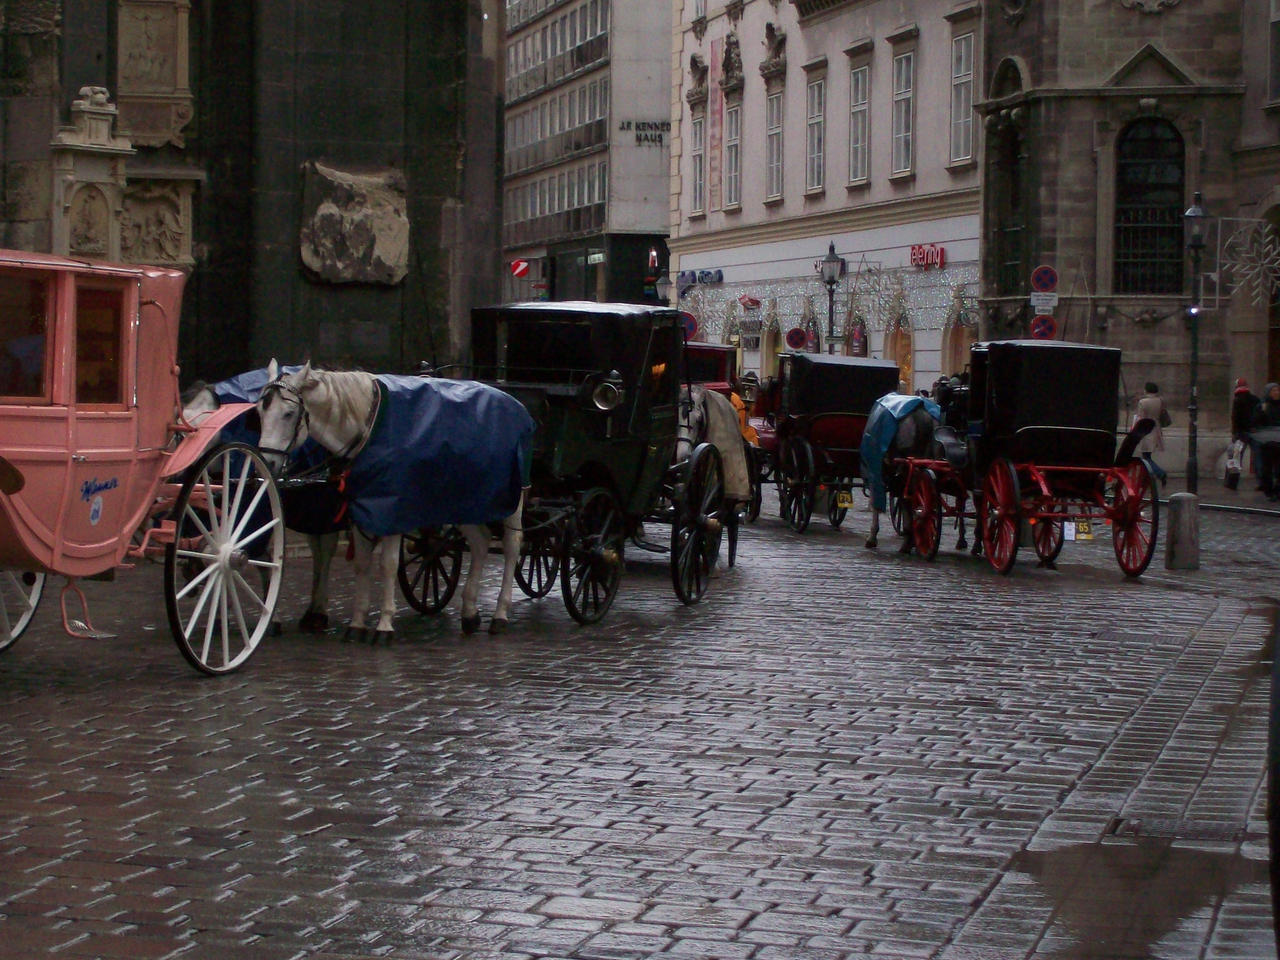 Cobbles and Carriages